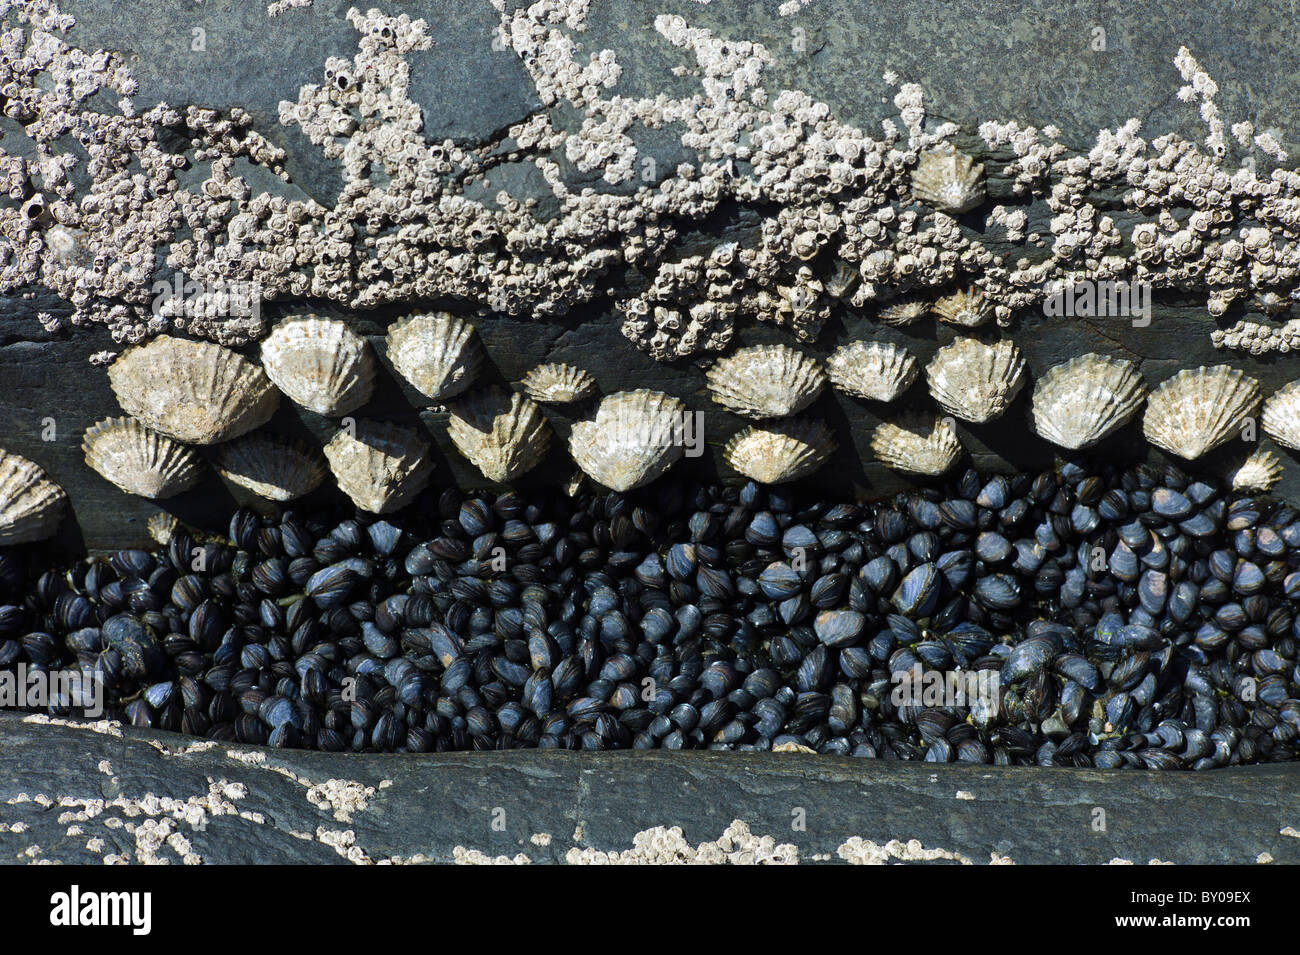 Rock pool with barnacles, mussels, limpets at Kilkee, County Clare, West Coast of Ireland Stock Photo